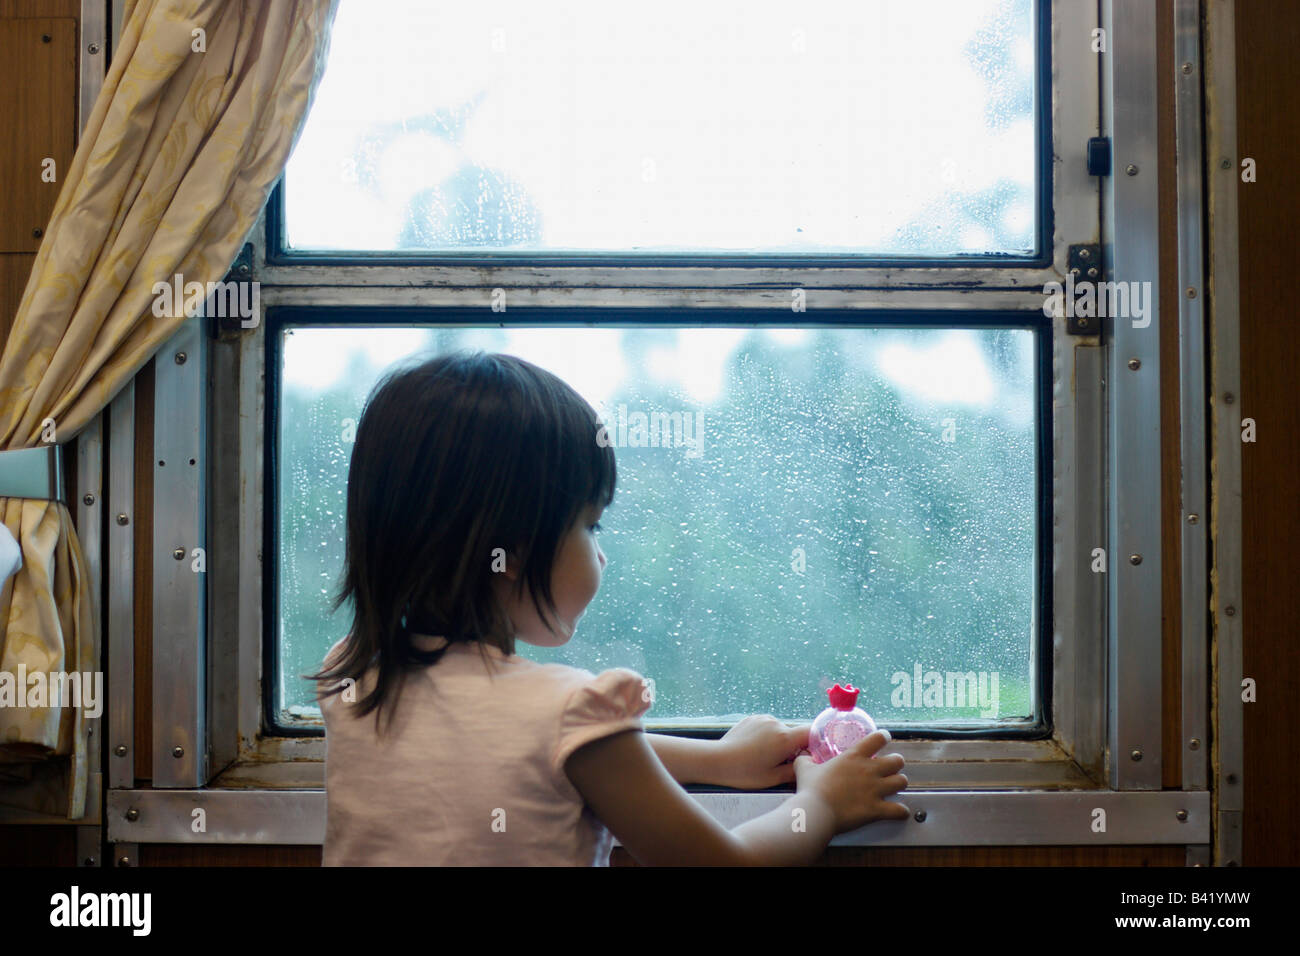 A four year old girl playing in the window of a moving train. Stock Photo